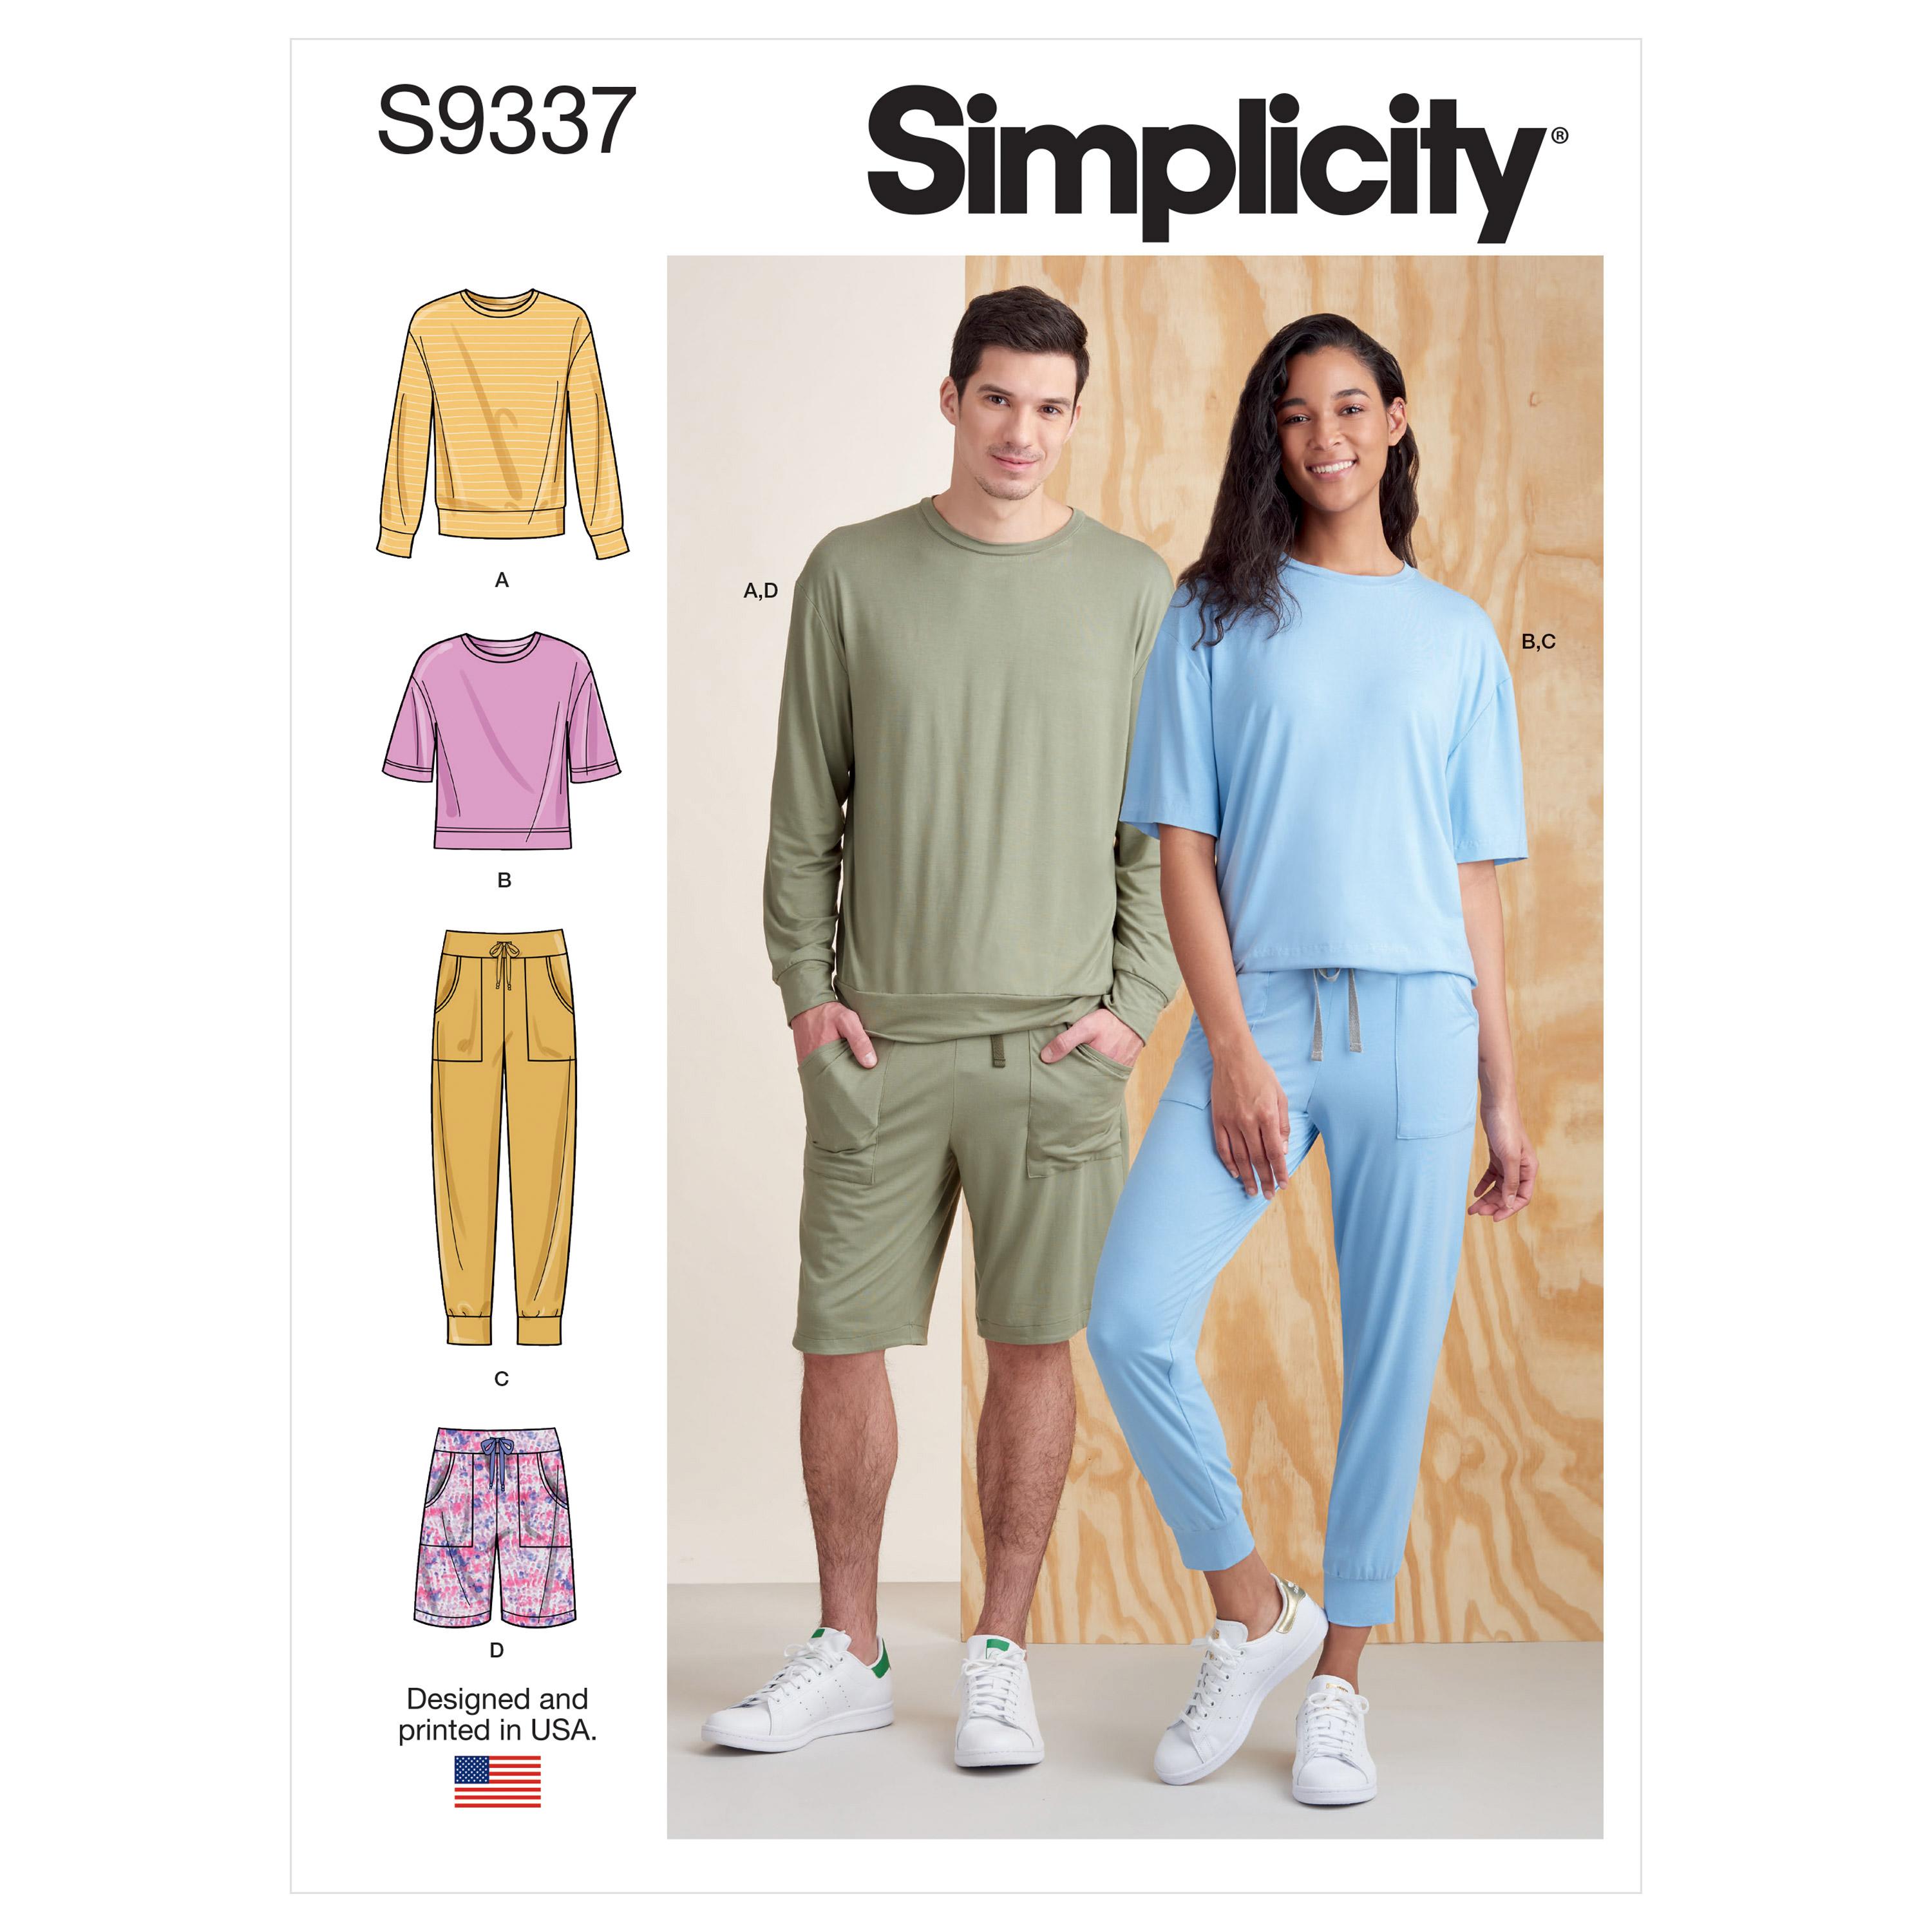 Simplicity Sewing Pattern S9337 Unisex Knits Only Tops, Pants and Shorts